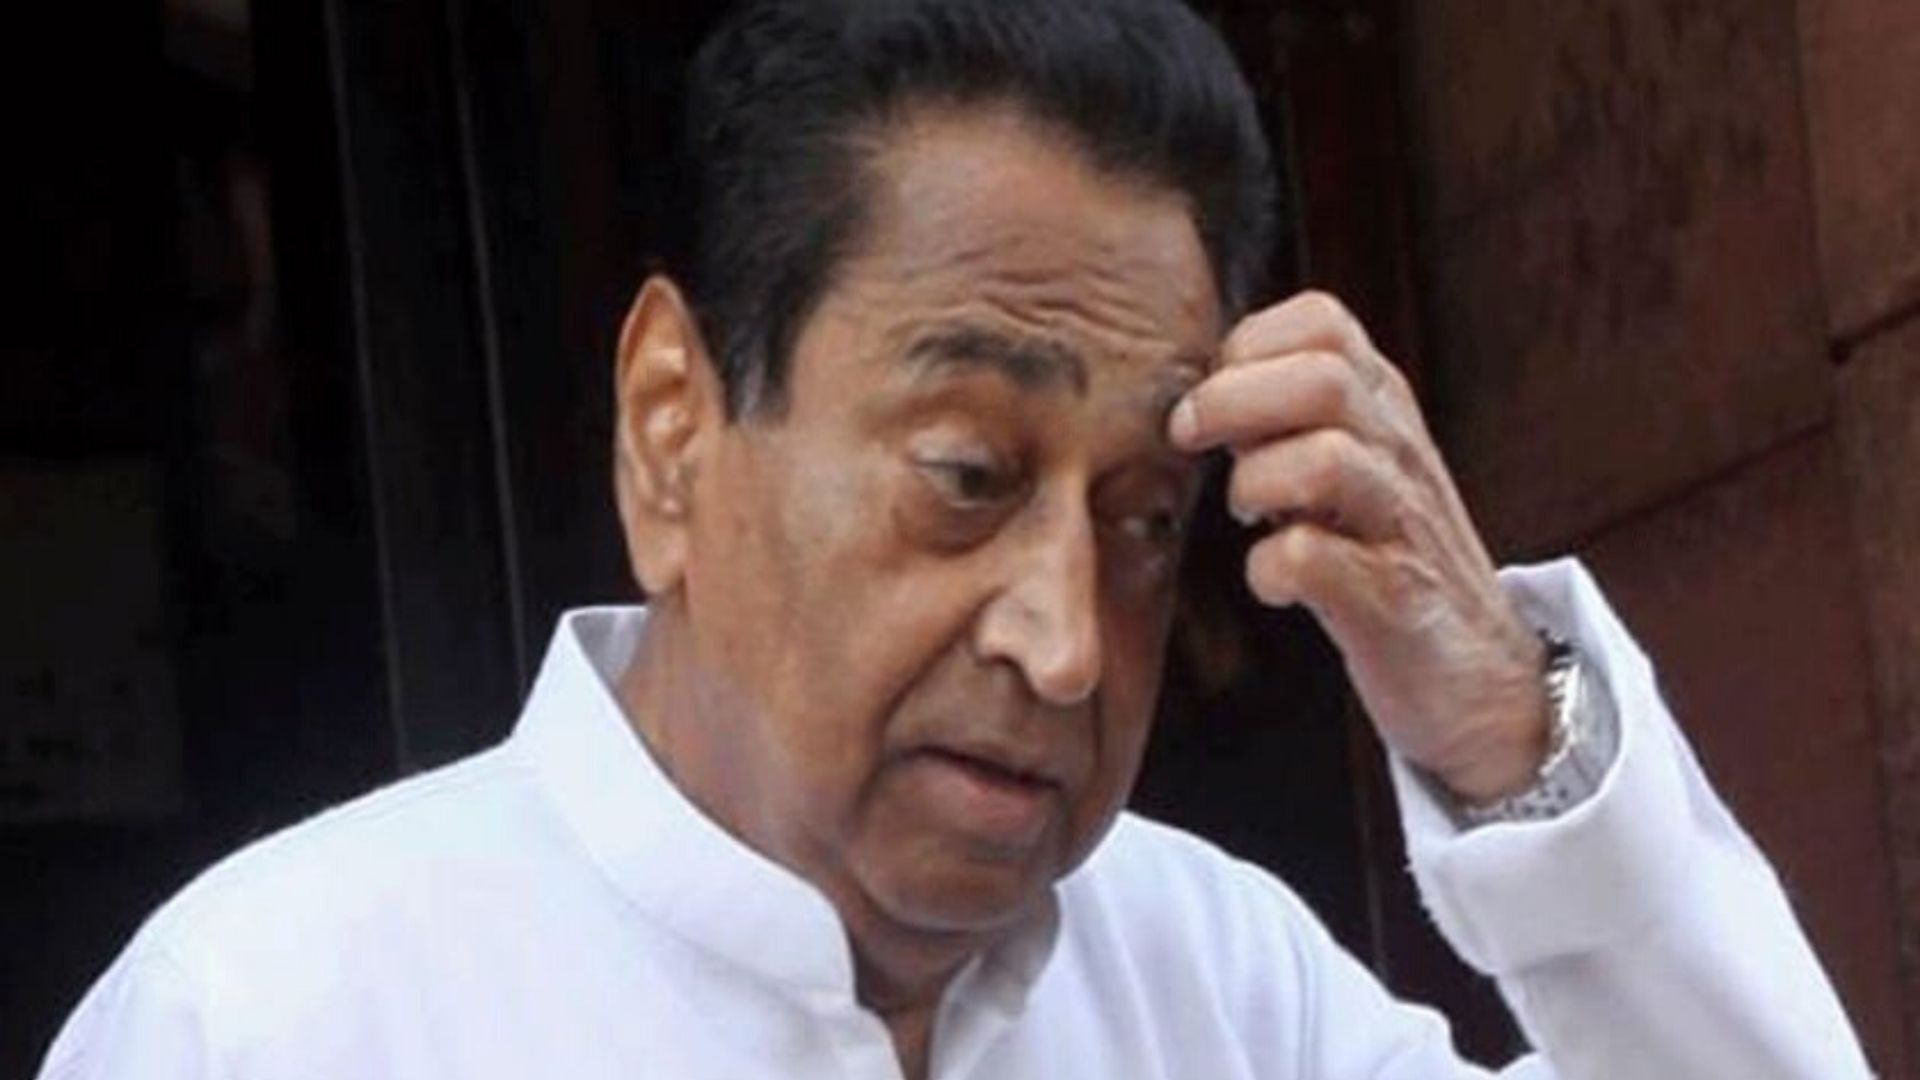 Speculation Surrounds Kamal Nath’s Potential Shift to BJP as He Arrives in Delhi